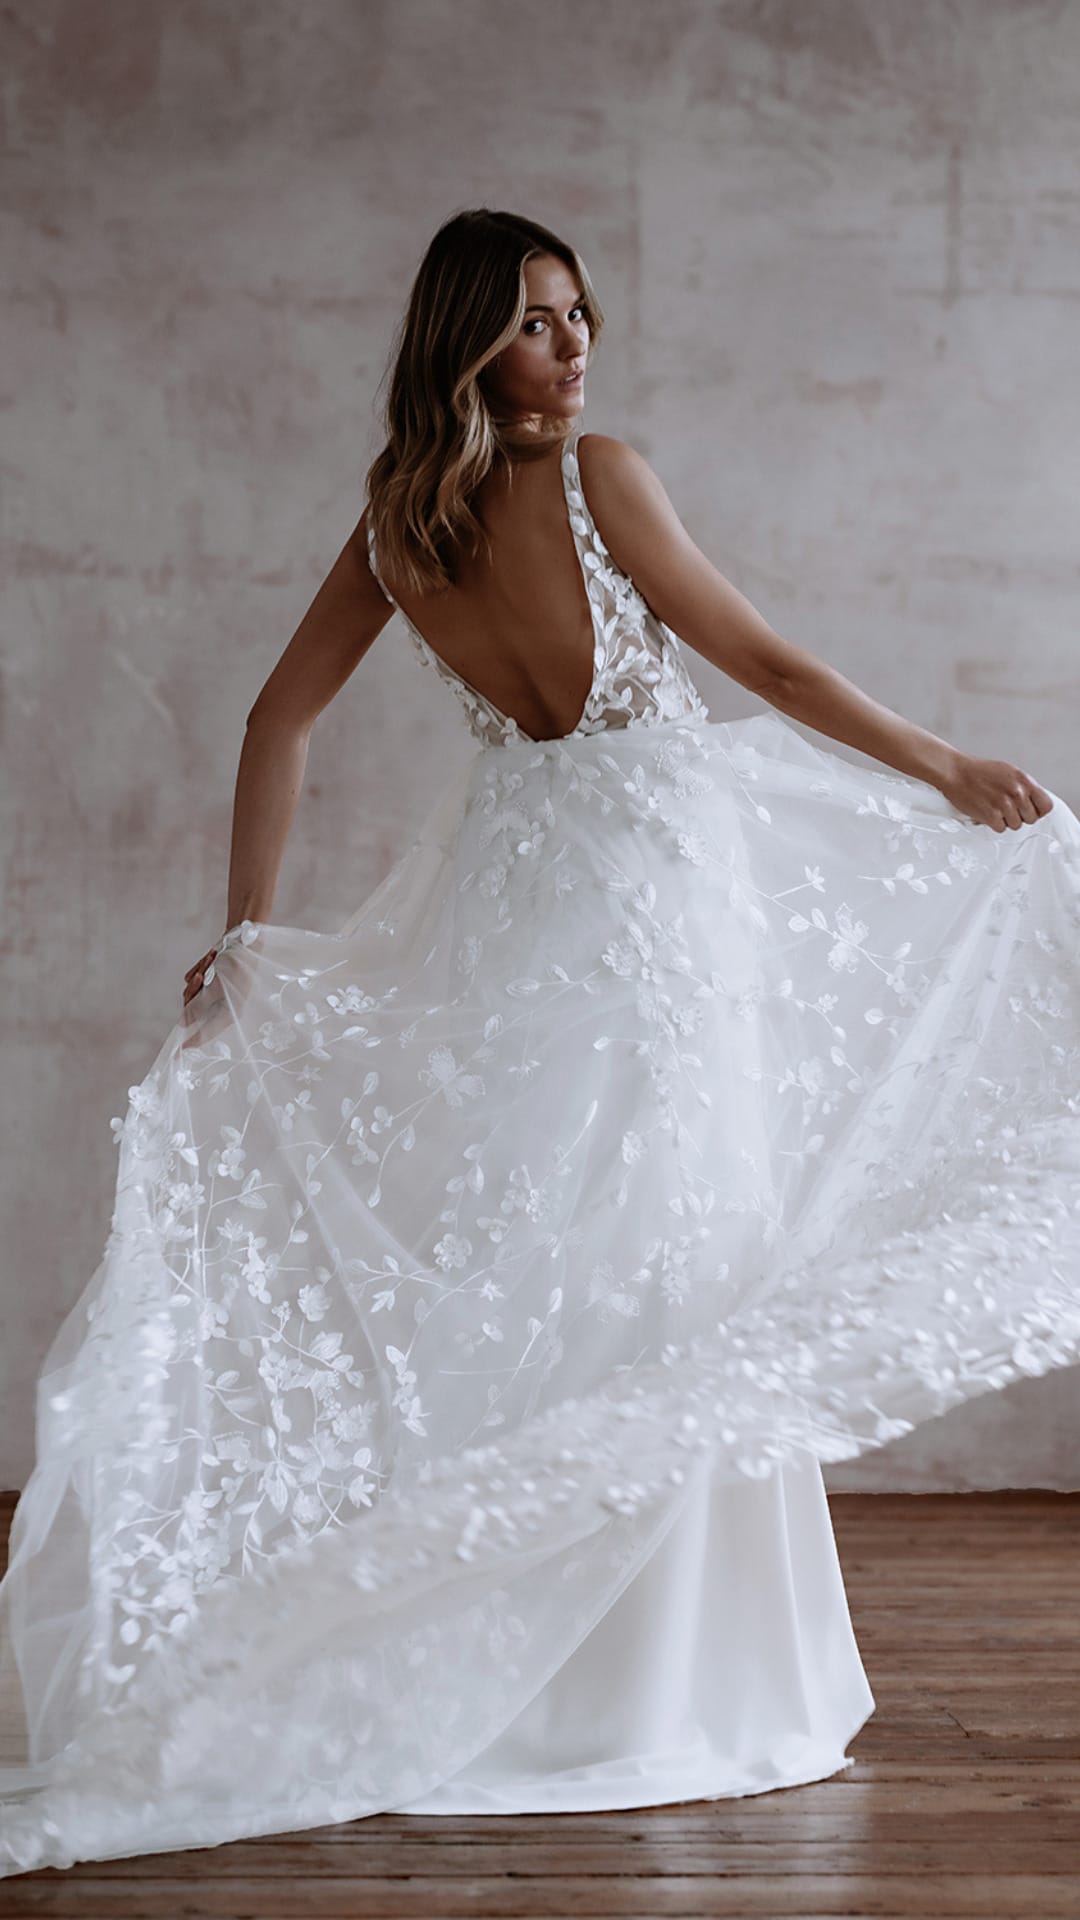 Gown Trains, Bustles and the Back Design | Elanna Wedding Lounge